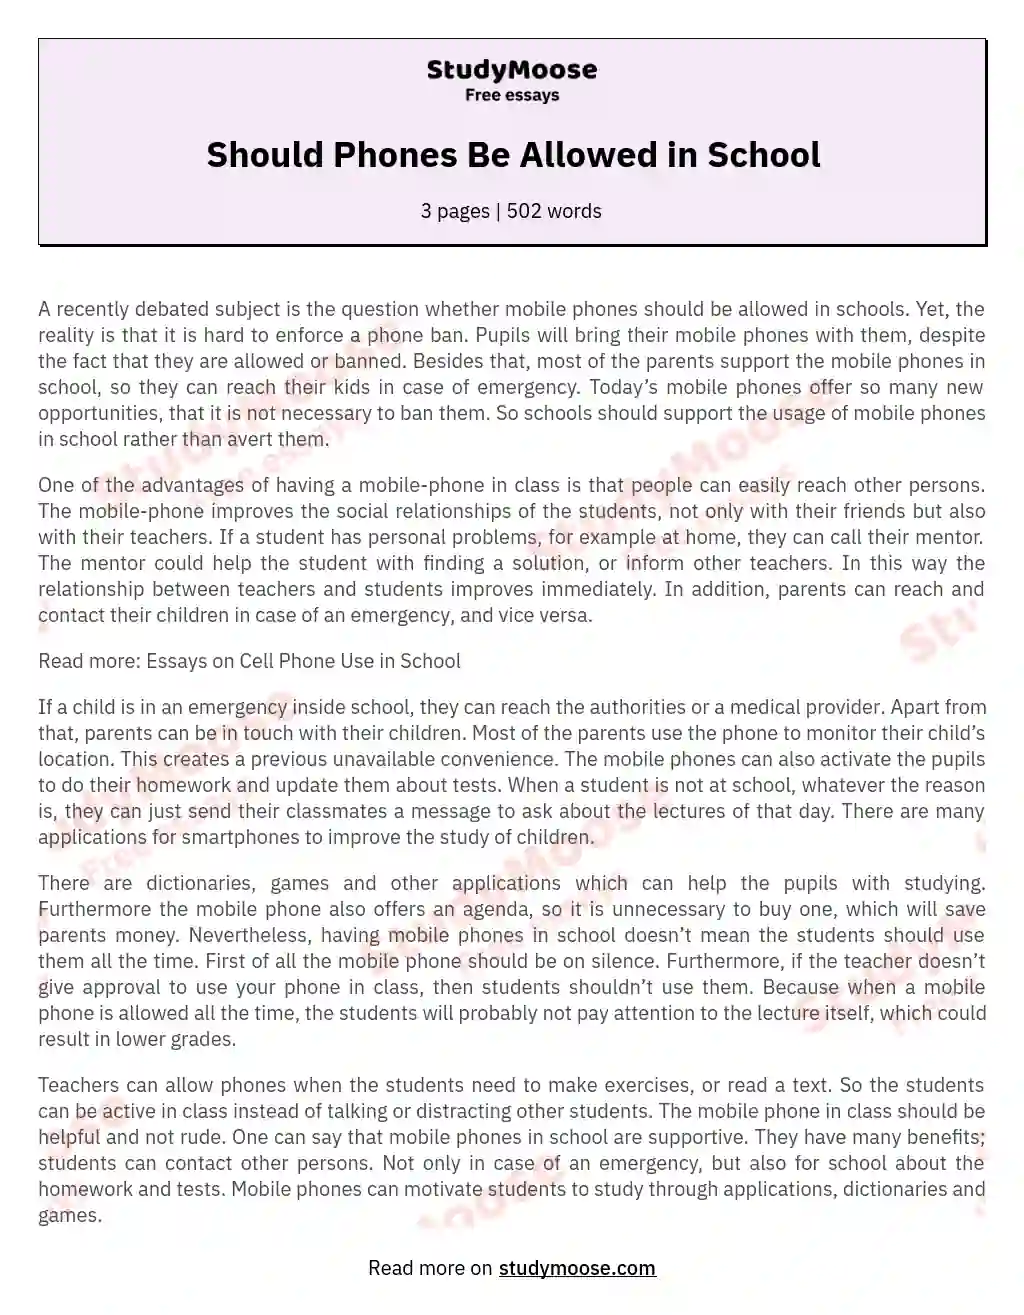 cell phones should not be allowed in school argumentative essay